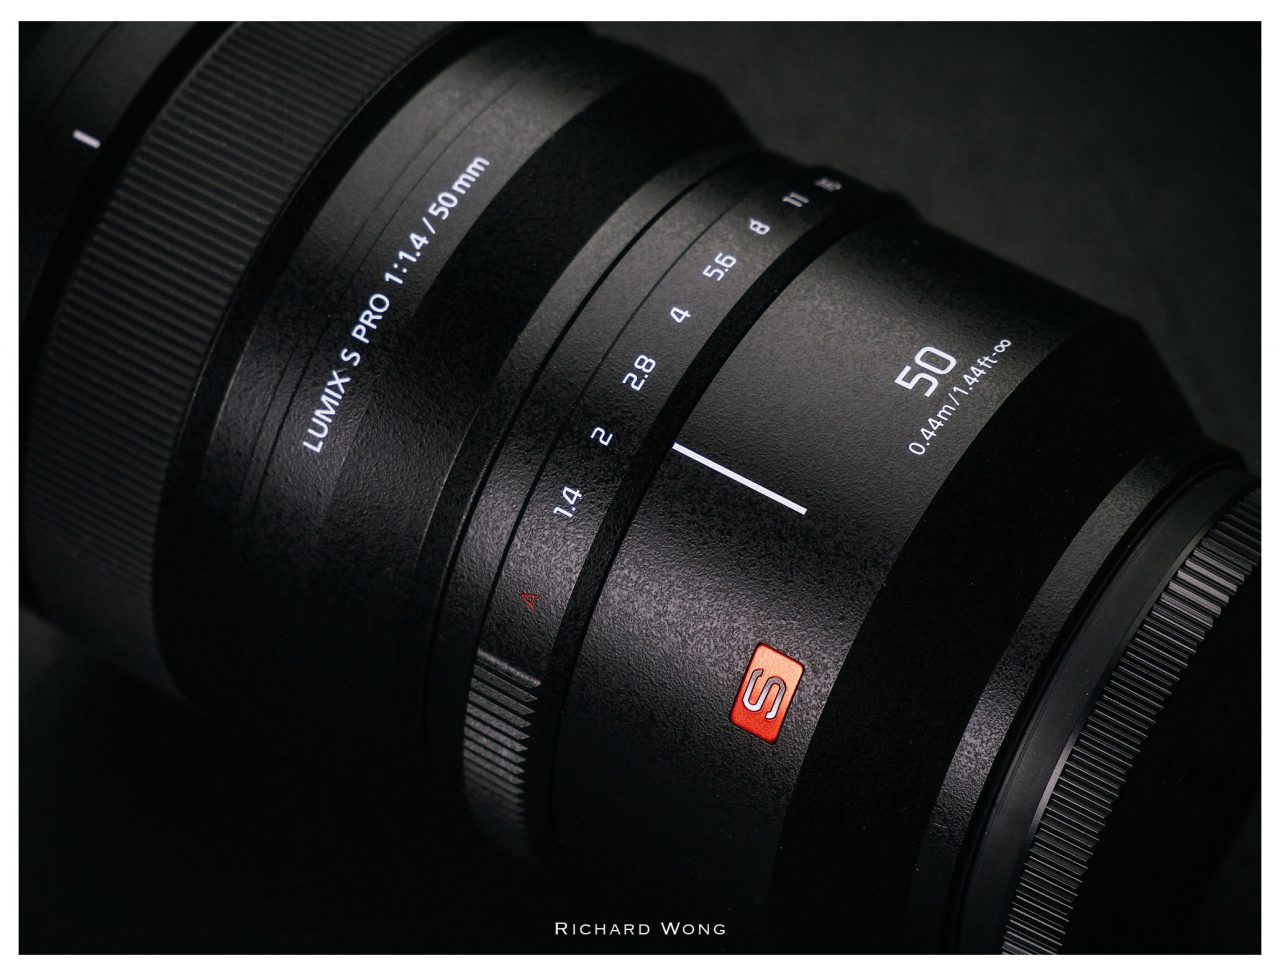 Wiegen persoon astronaut Panasonic Lumix S Pro 50mm f/1.4 Review – Review By Richard